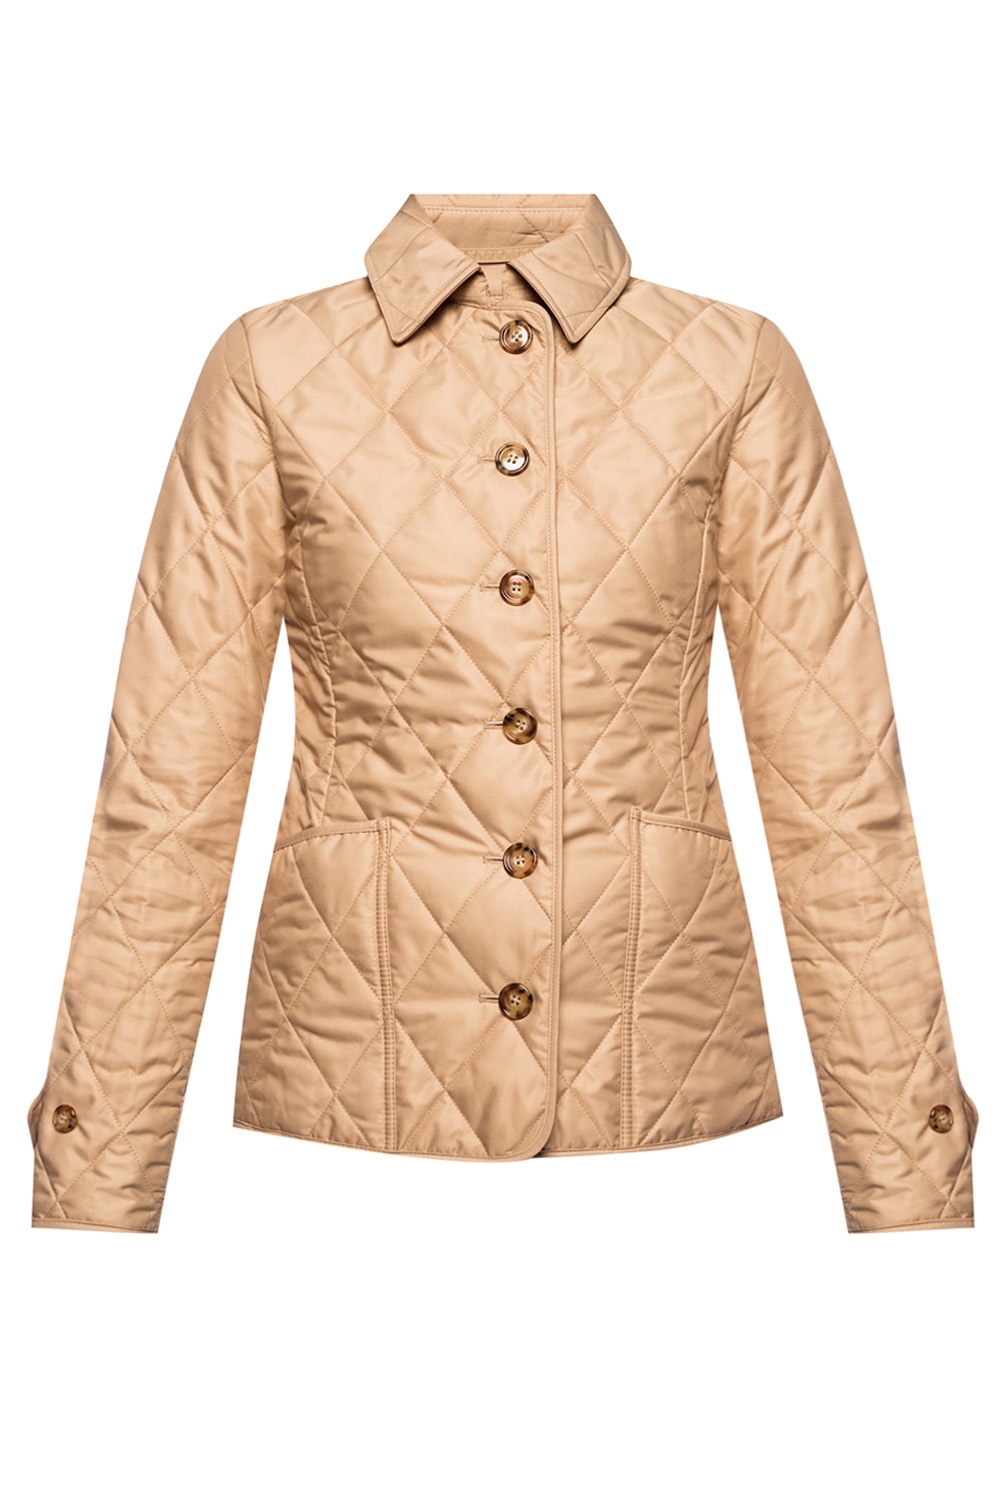 Burberry Quilted jacket | Women's Clothing | Vitkac